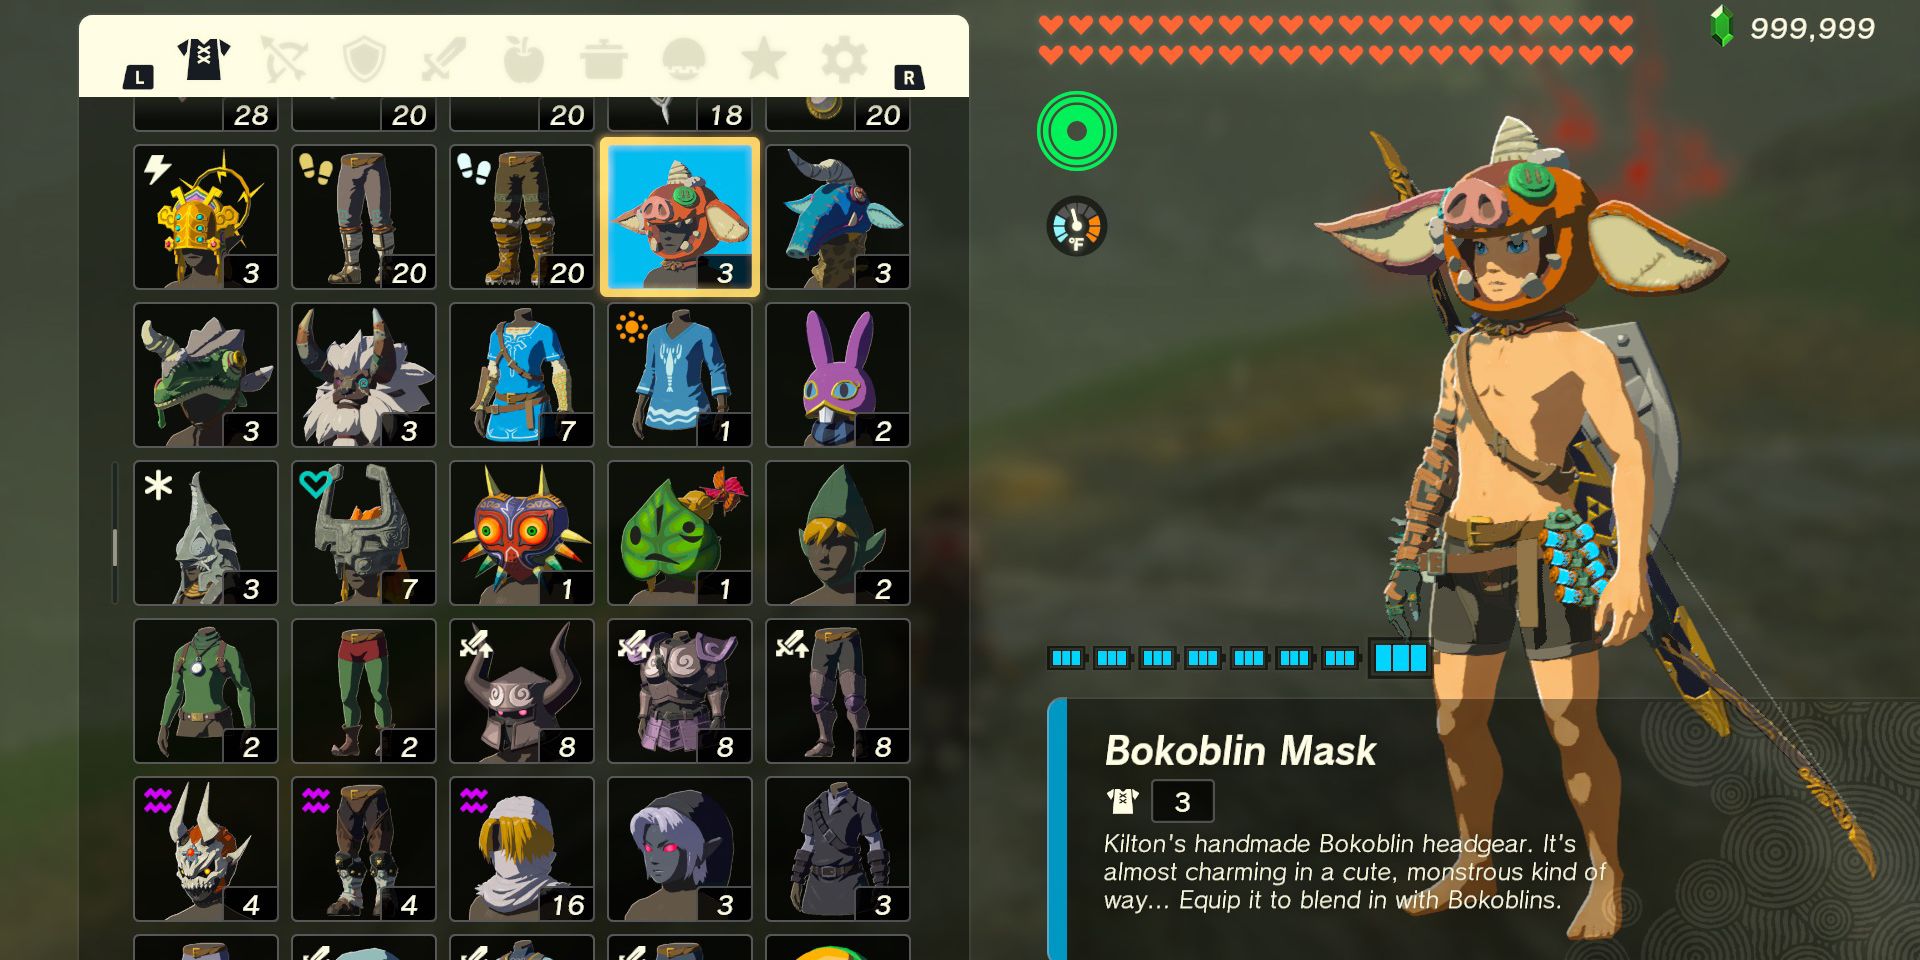 The armor piece of the Bokoblin mask in The Legend of Zelda: Tears of the Kingdom